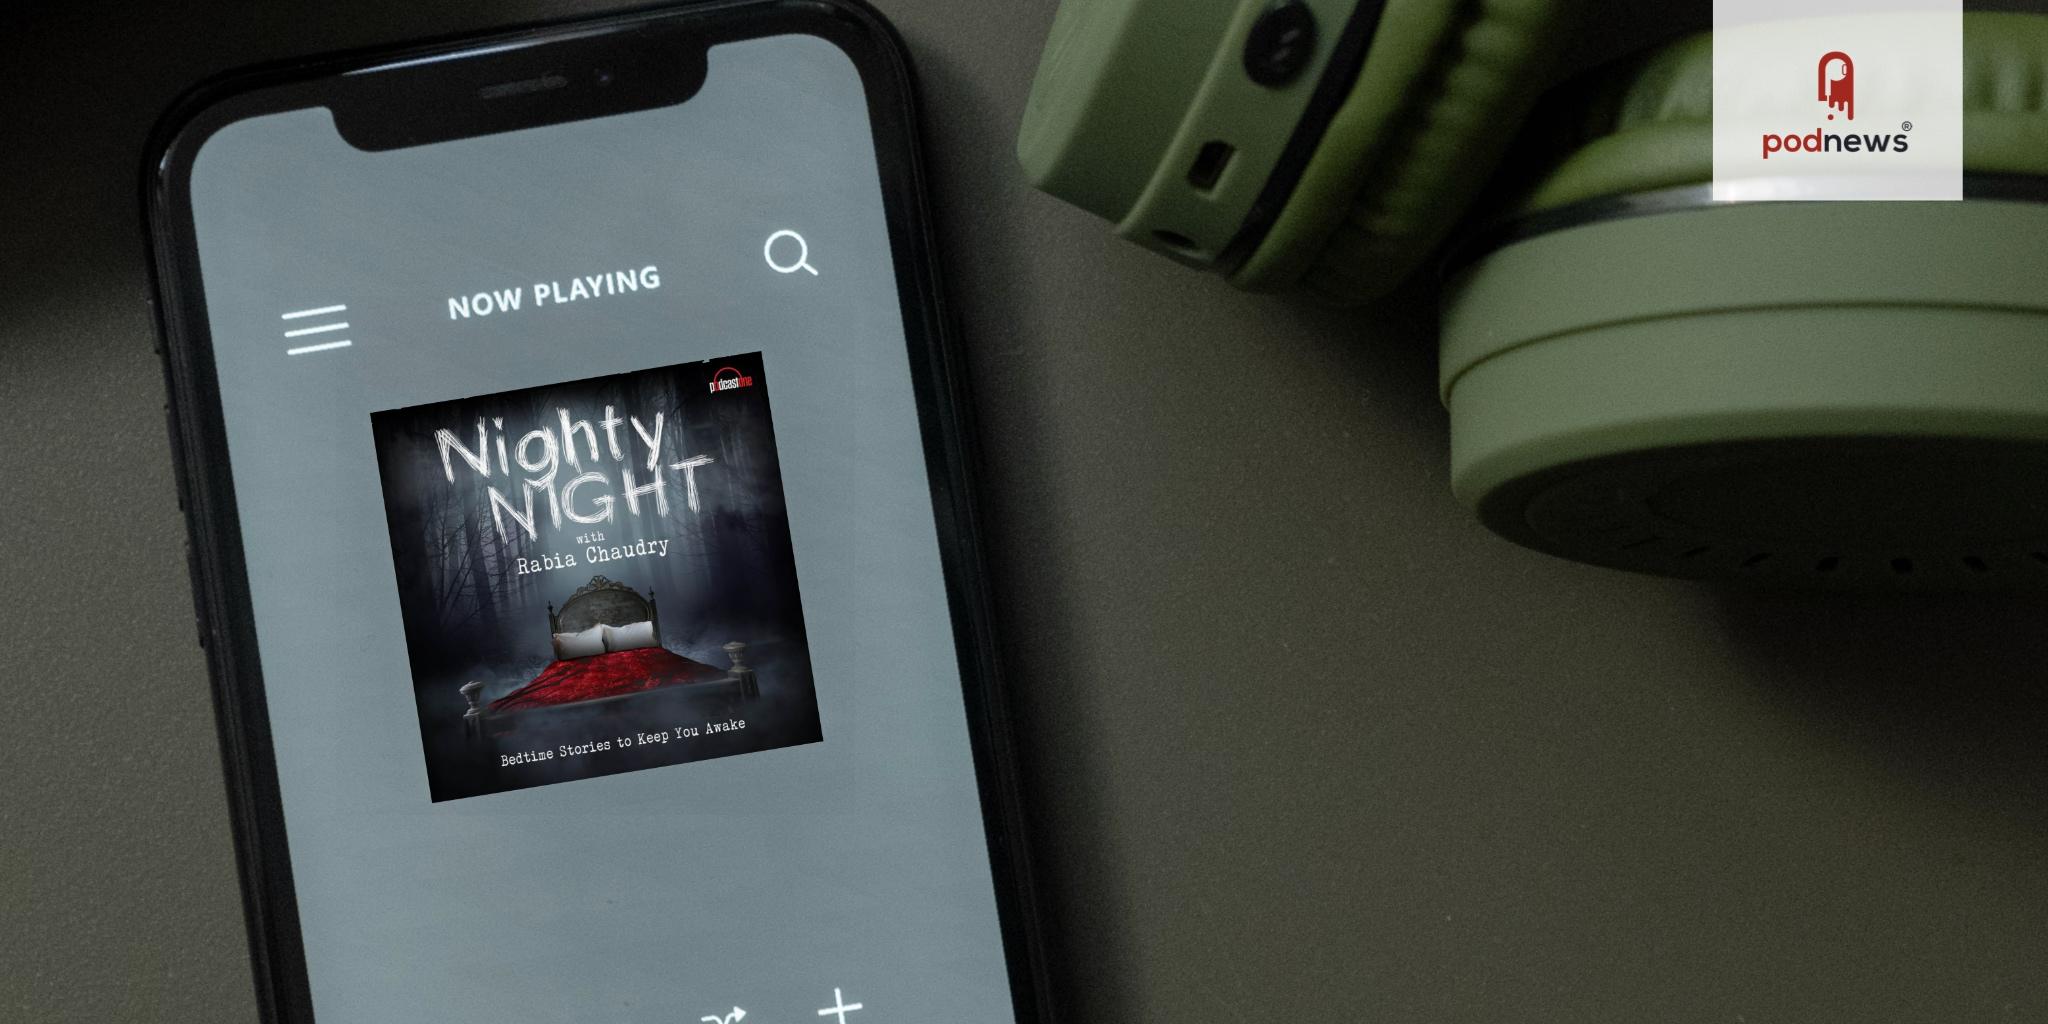 PodcastOne Signs Exclusive Multi-Year Partnership with Rabia Chaudry’s Nighty Night Anthology Podcast Series